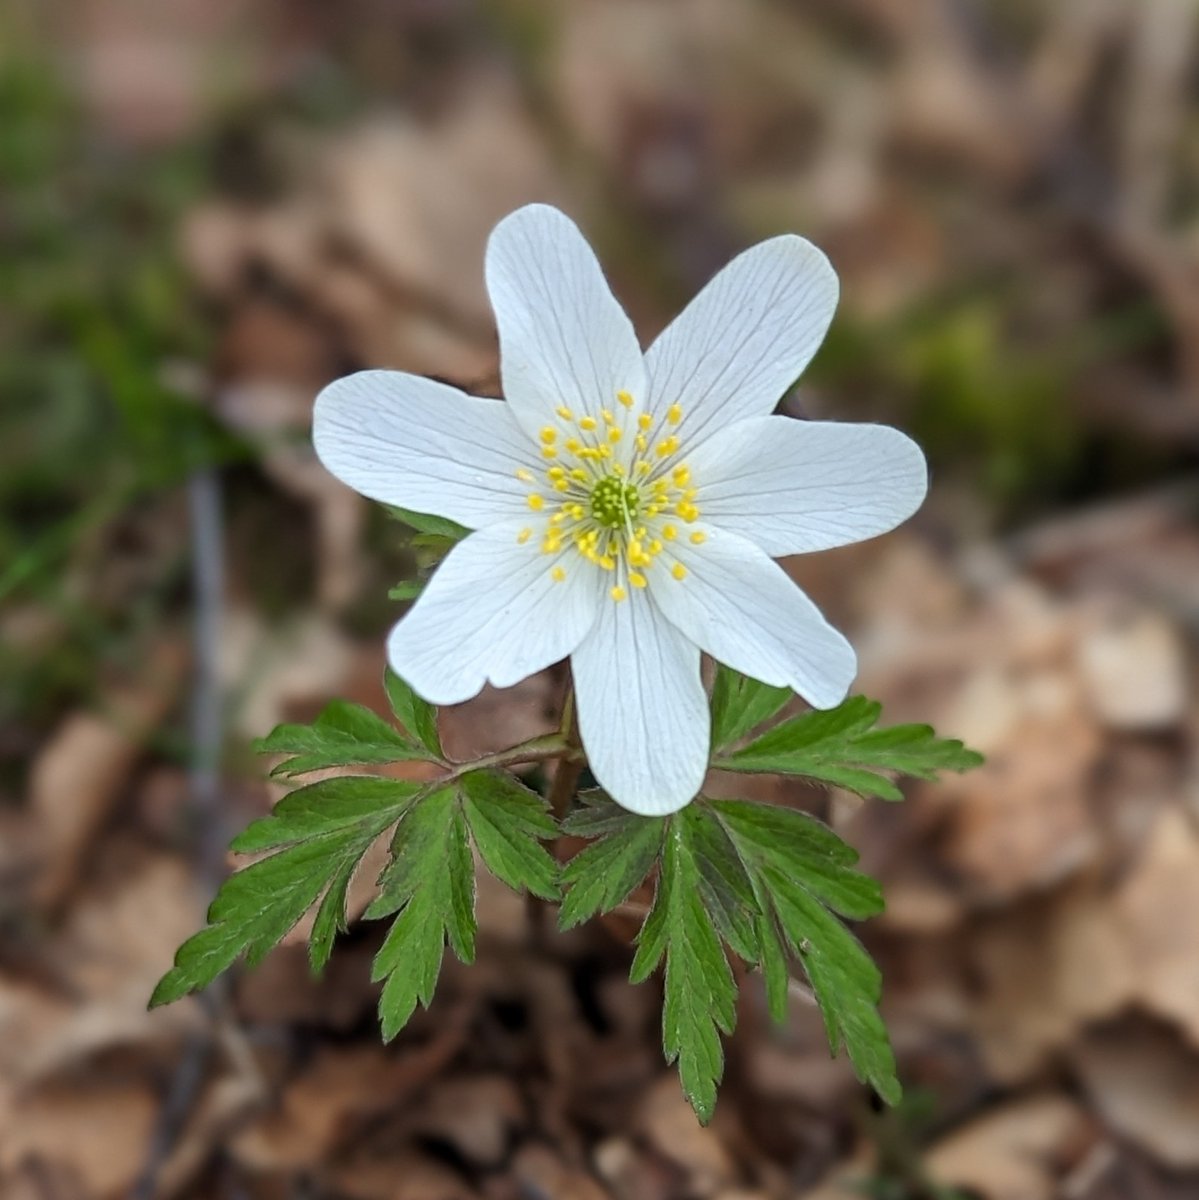 Love seeing the wood anemones appear! Sure sign of spring. Share pics of the #wildflowers on your ambles. 😃 @CNPnature @PlantlifeScot #WildflowerWednesday #Cairngorms